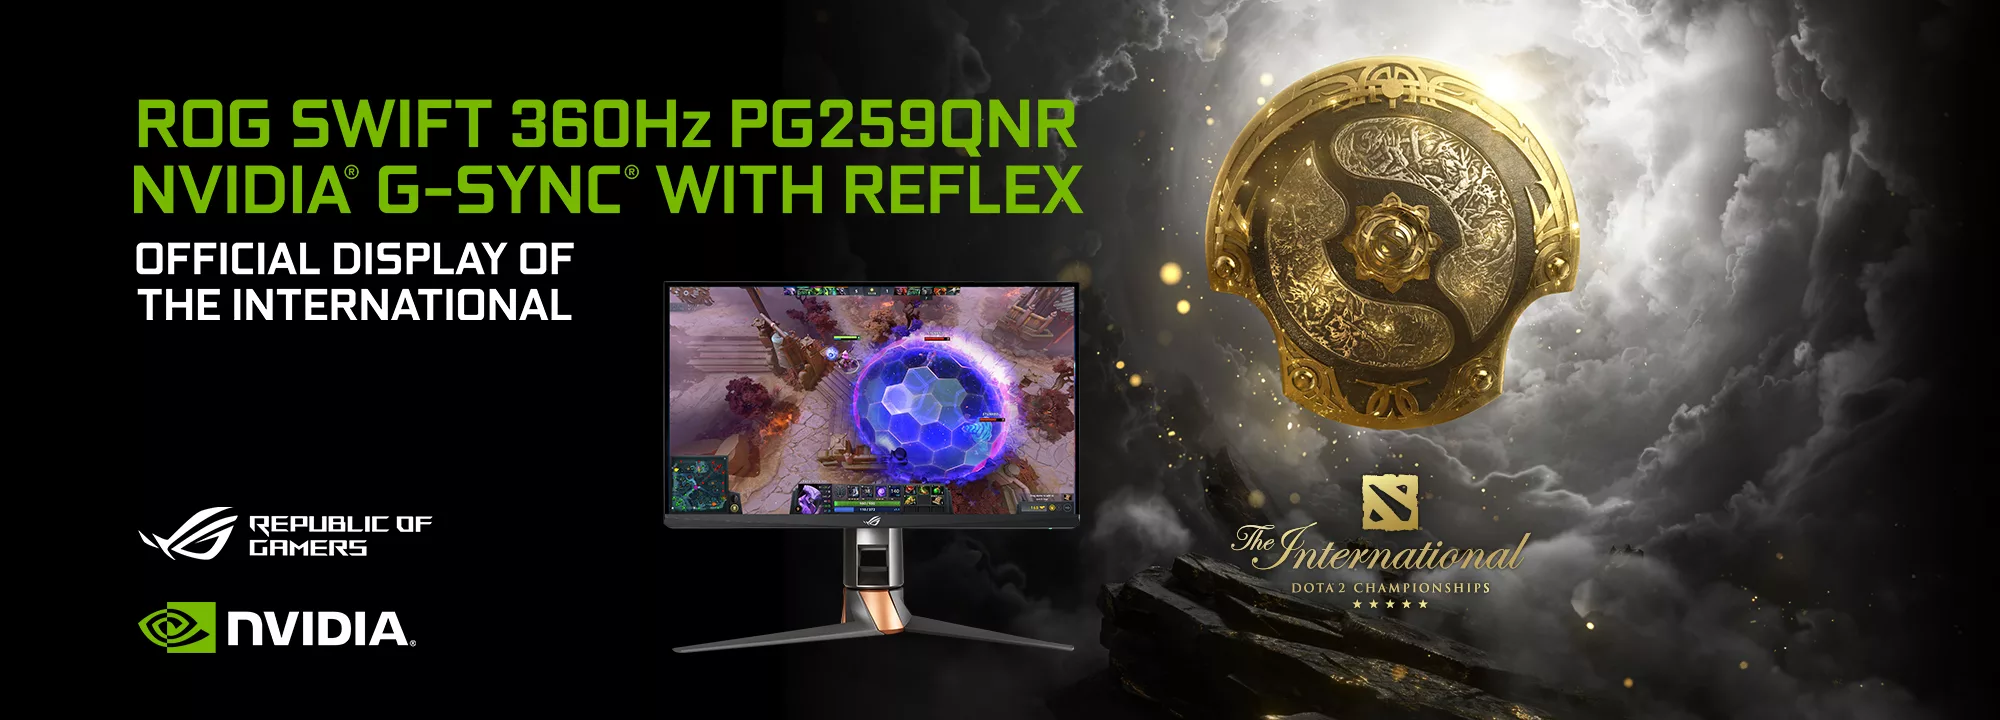 World's Fastest 360Hz Display Powered By G-SYNC